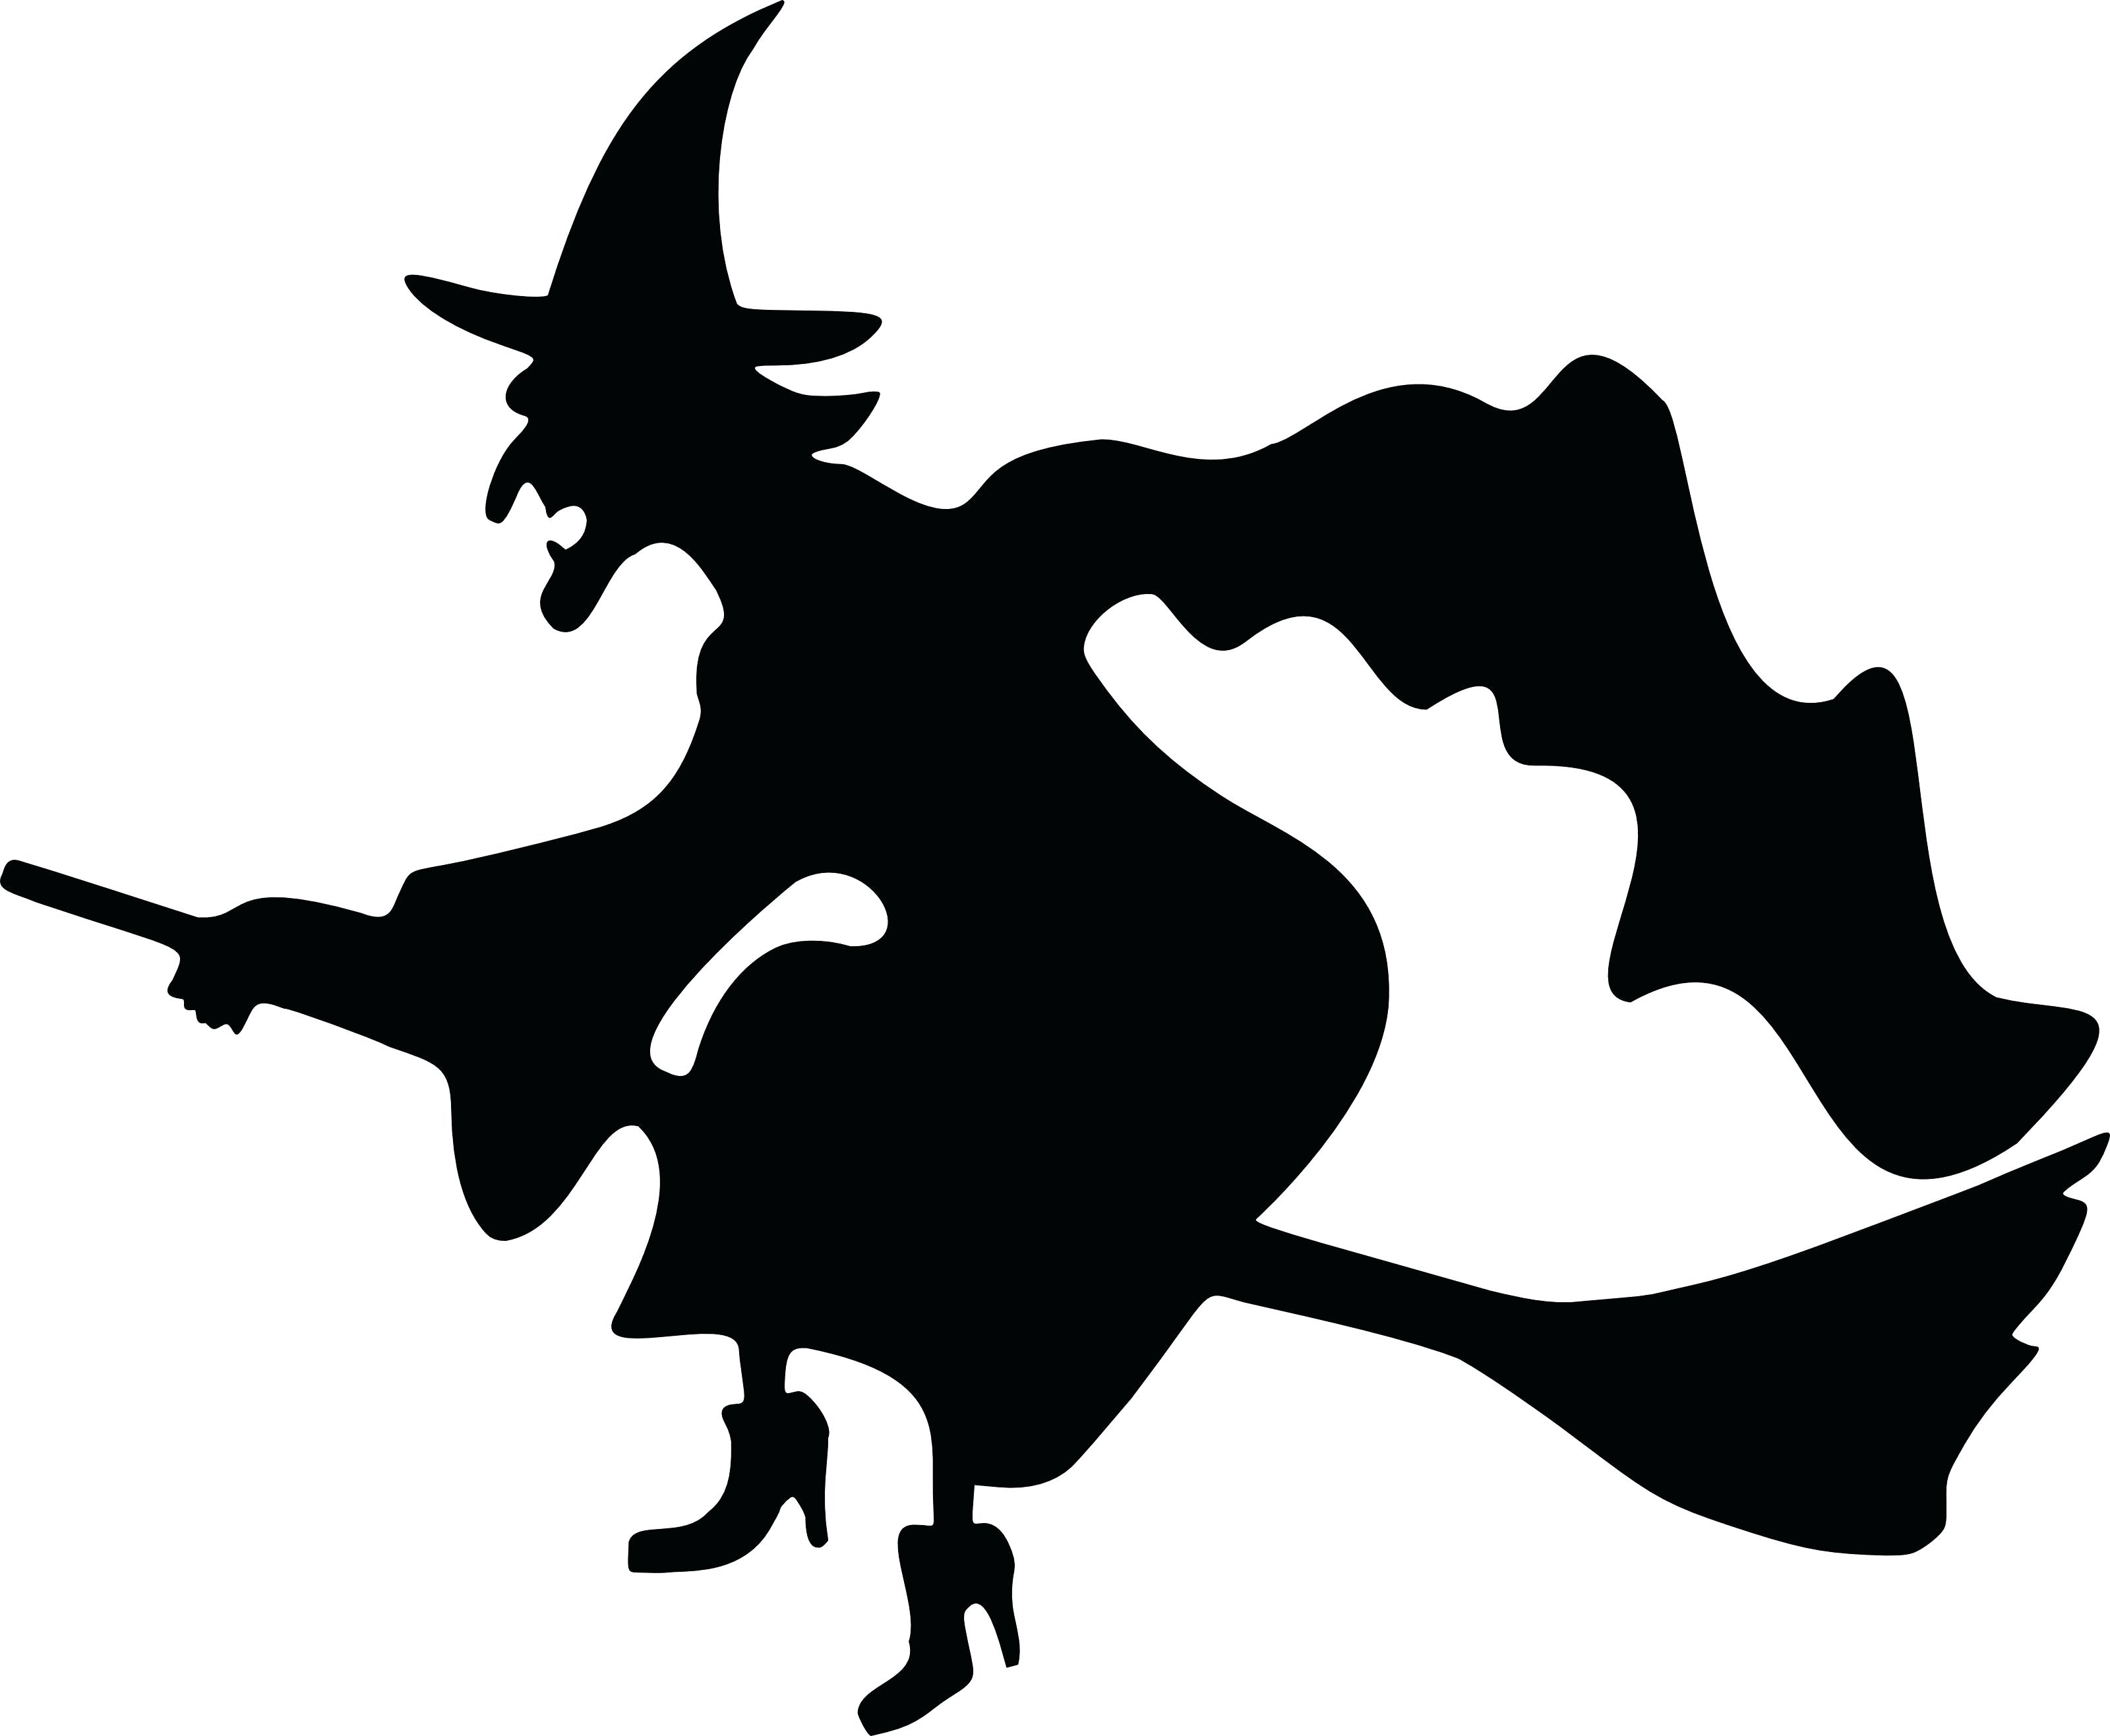 Halloween Witch Silhouette Templates at GetDrawings Free download